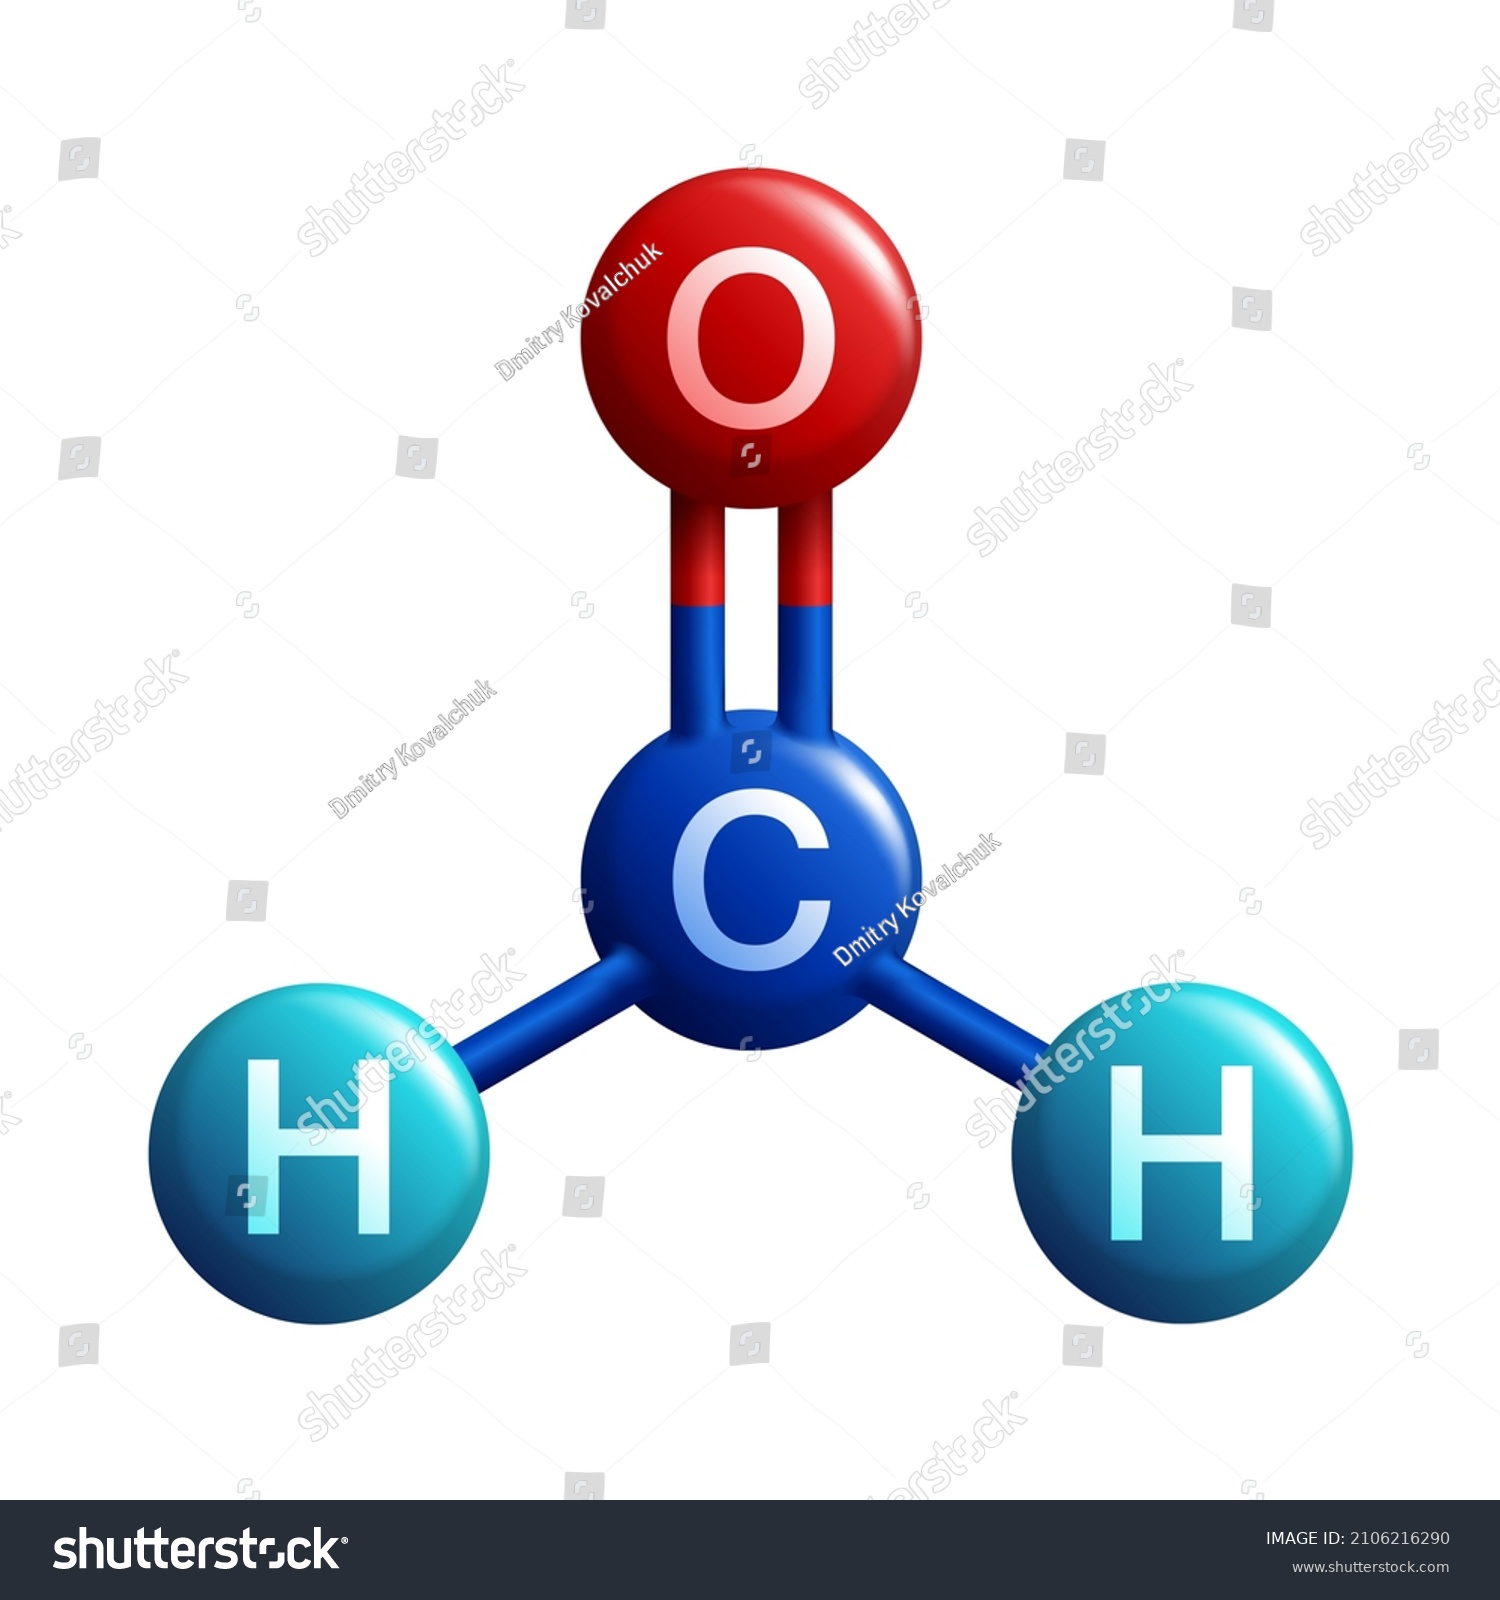 SVG of Formaldehyde 3D scheme with molecular structure - organic CH2O compound - pungent-smelling colourless gas that polymerises spontaneously into paraformaldehyde svg